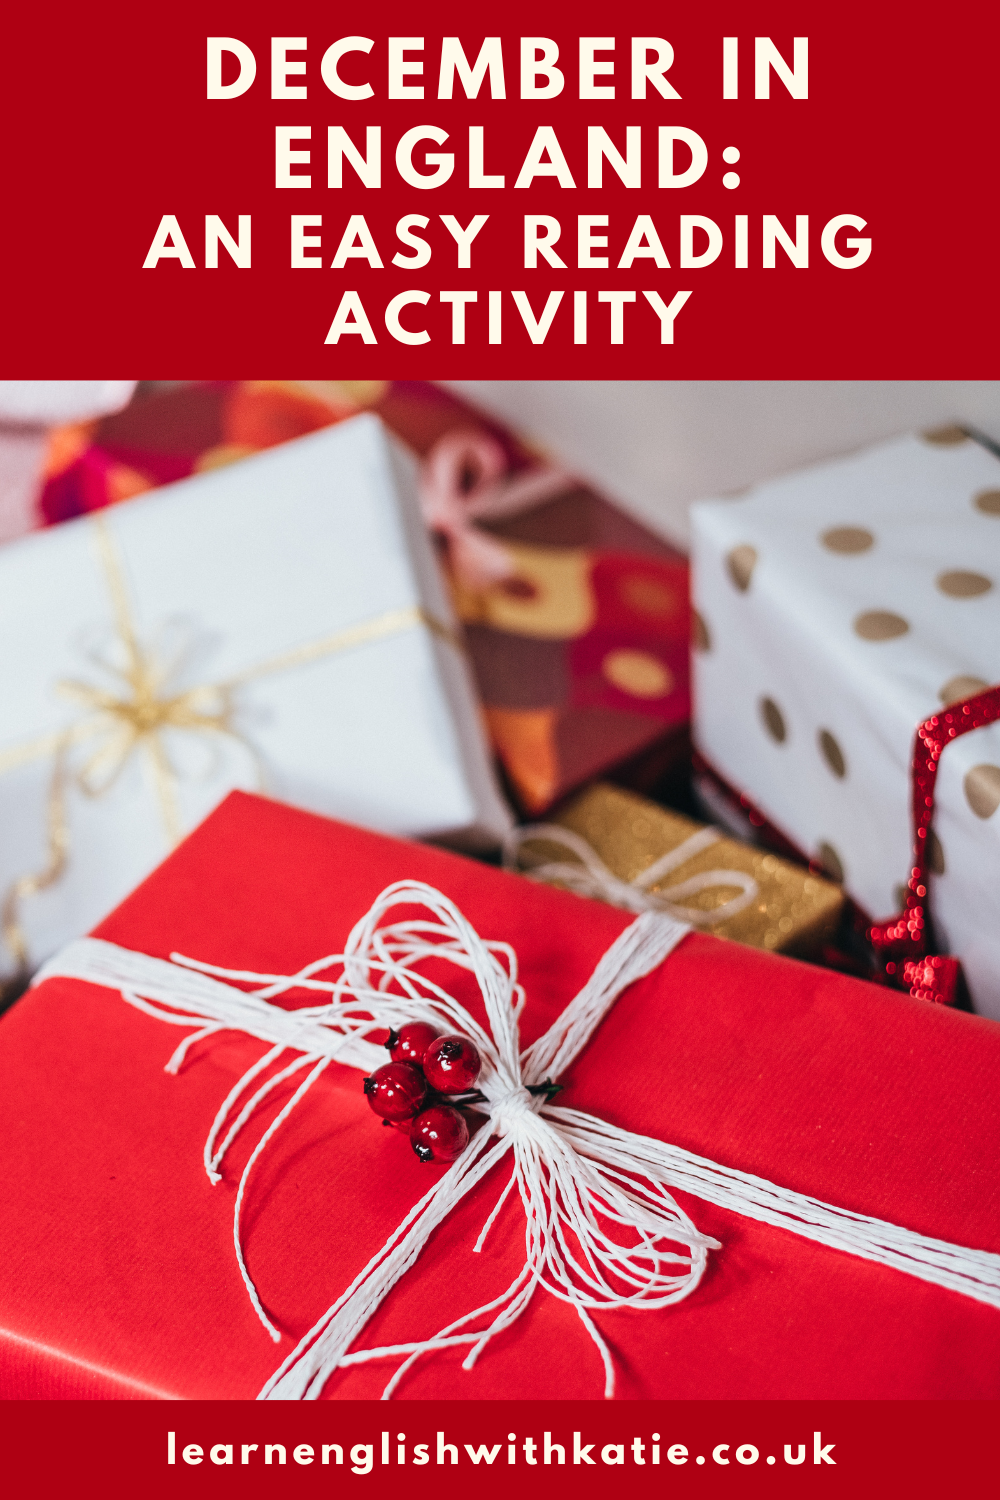 Pinterest pin showing image of Christmas presents.